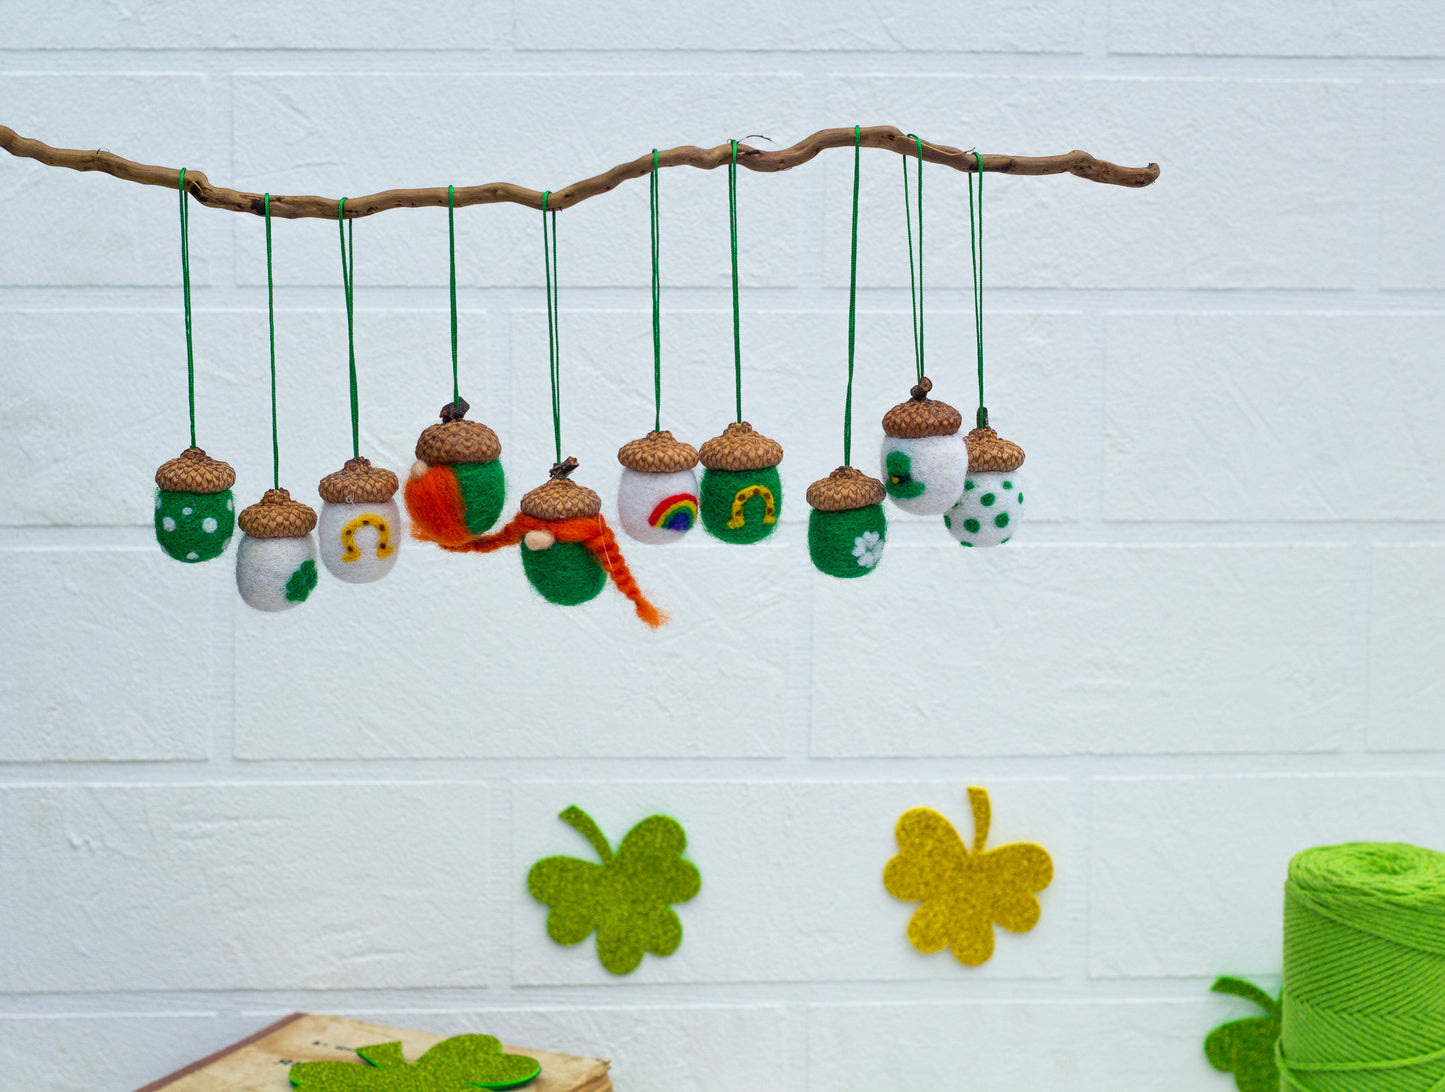 St. Patrick's Day acorns ornaments Set of 10 natural rustic holiday decorations